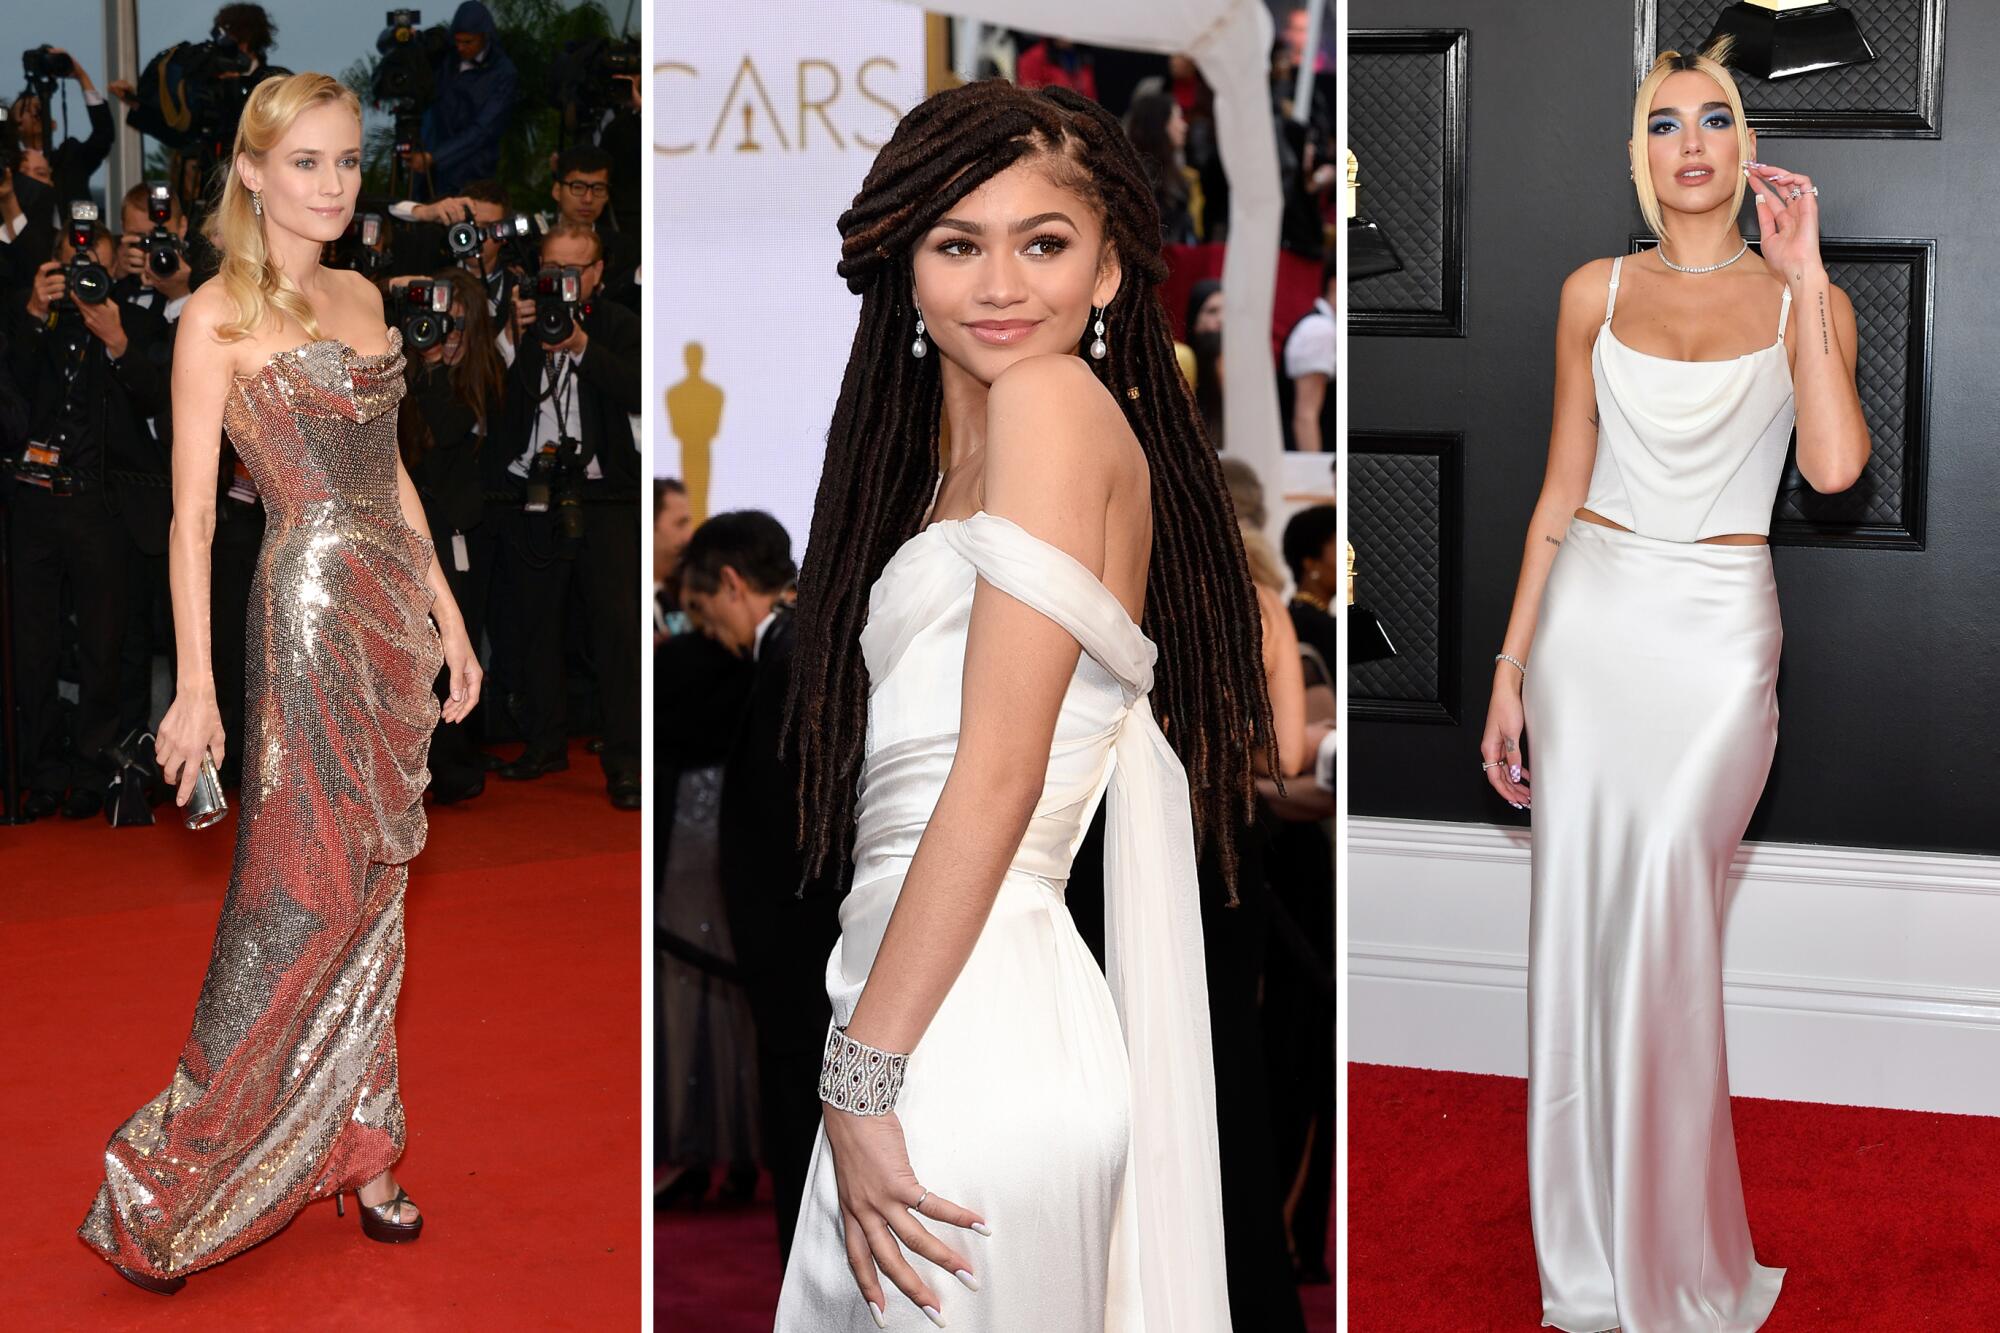 Three women show off their evening gowns on the red carpet.